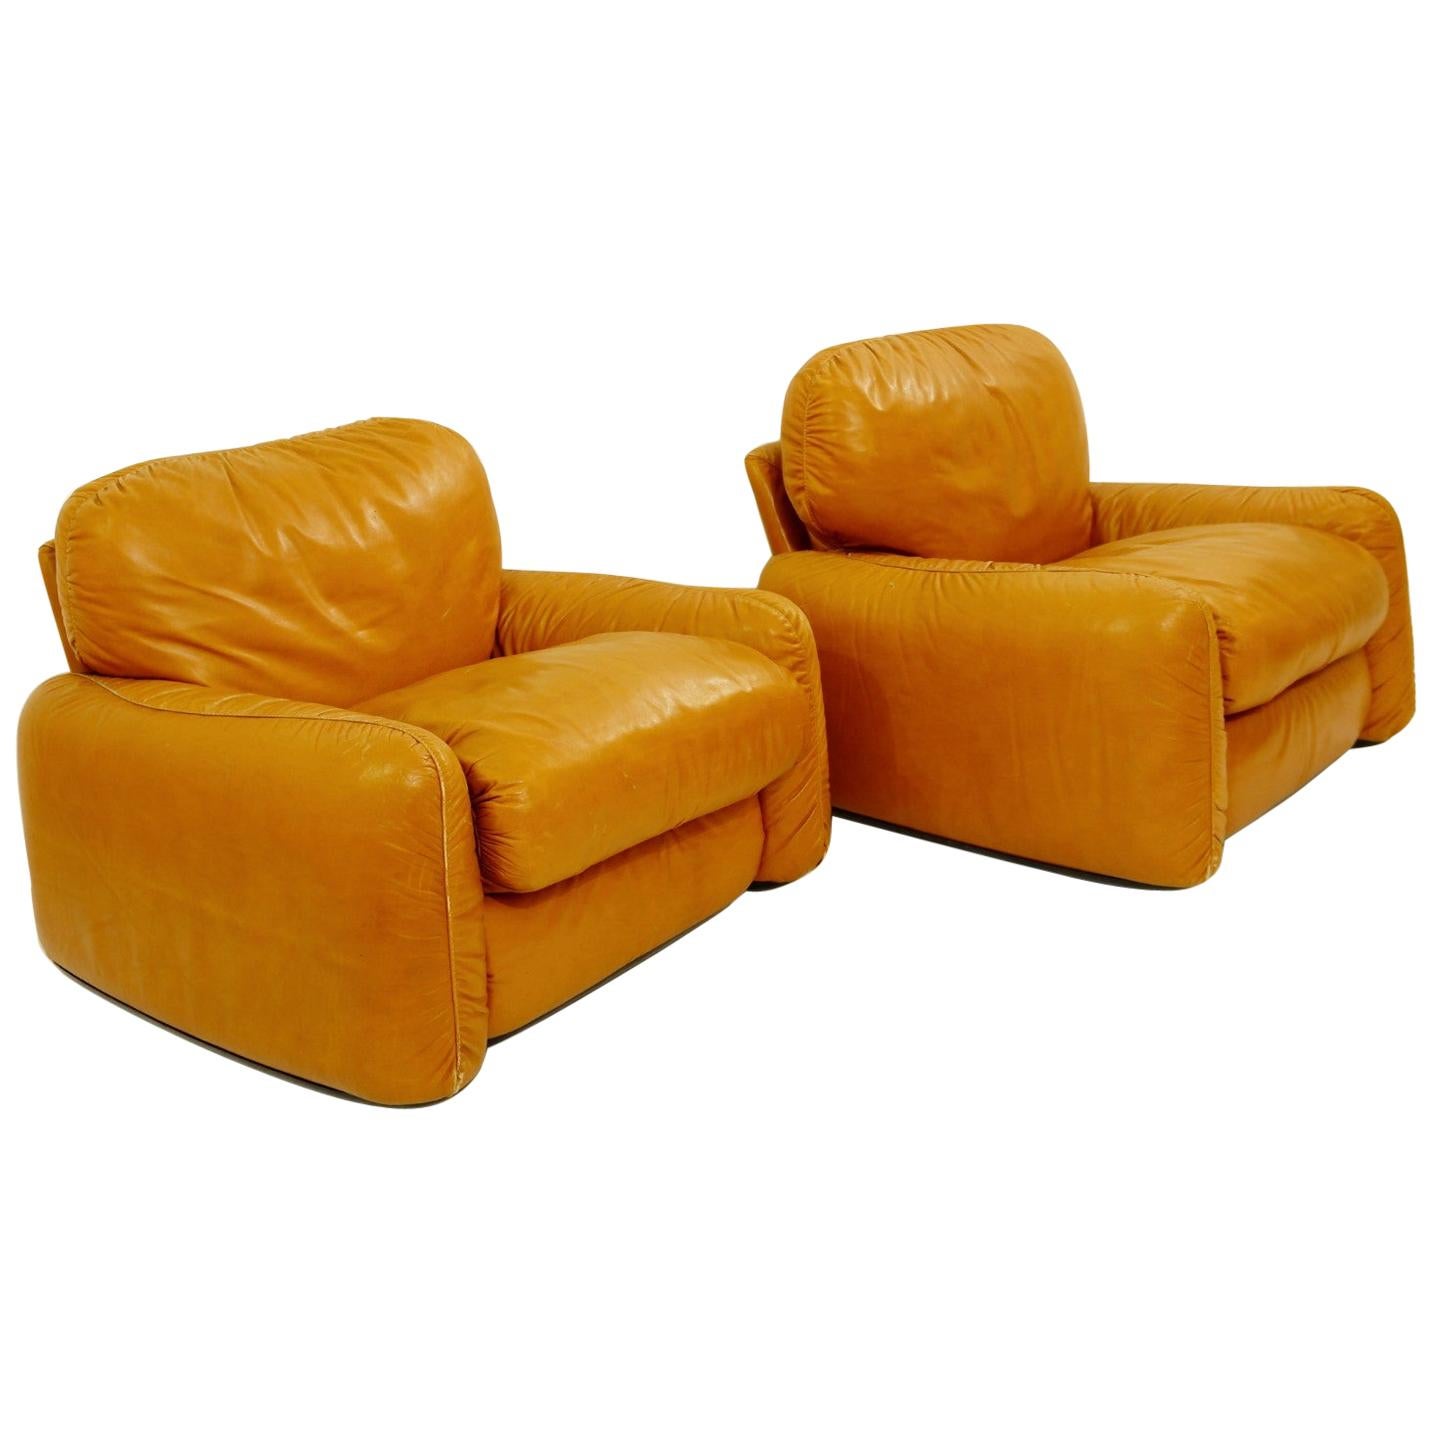 Pair of Cognac Leather Lounge Chairs by Arrigo Arrigoni for Busnelli, 1970s